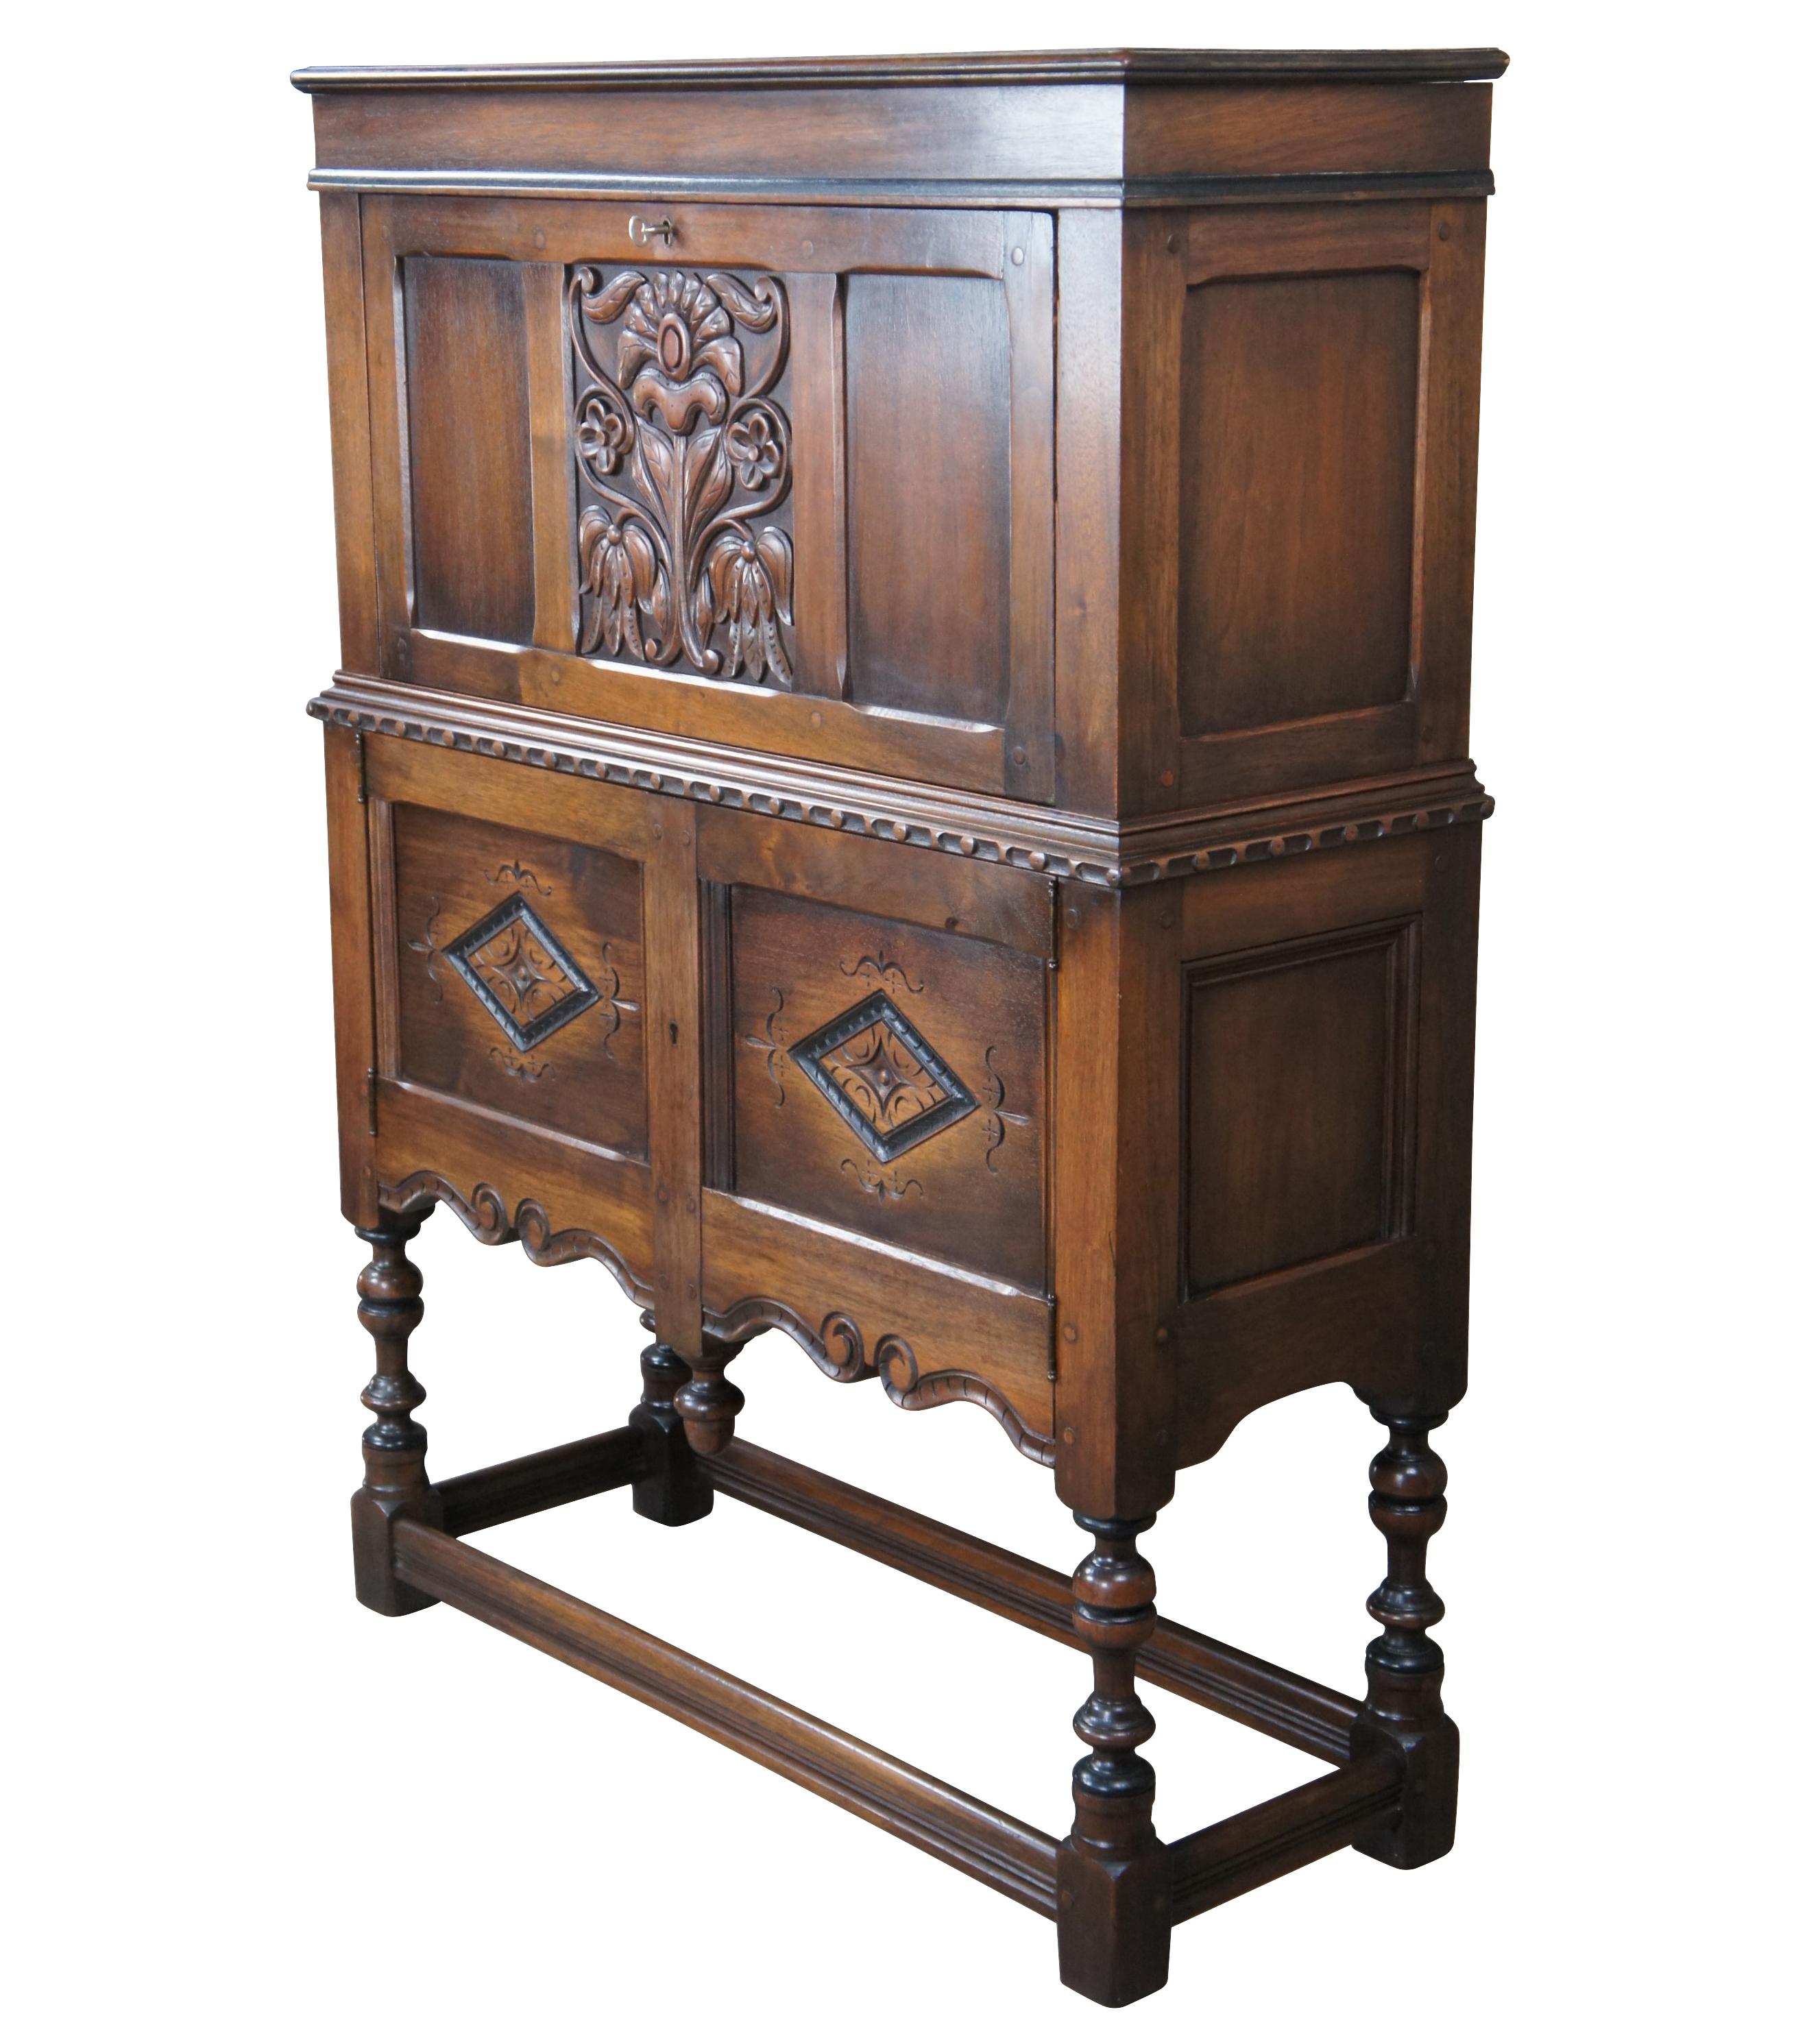 Extremely rare one of a kind early Kittinger Jacobean Revival fall front secretary writing desk. Made from American walnut with a carved and paneled front featuring a floral motif over diamond patterned lower doors. The secretary opens via lock to a